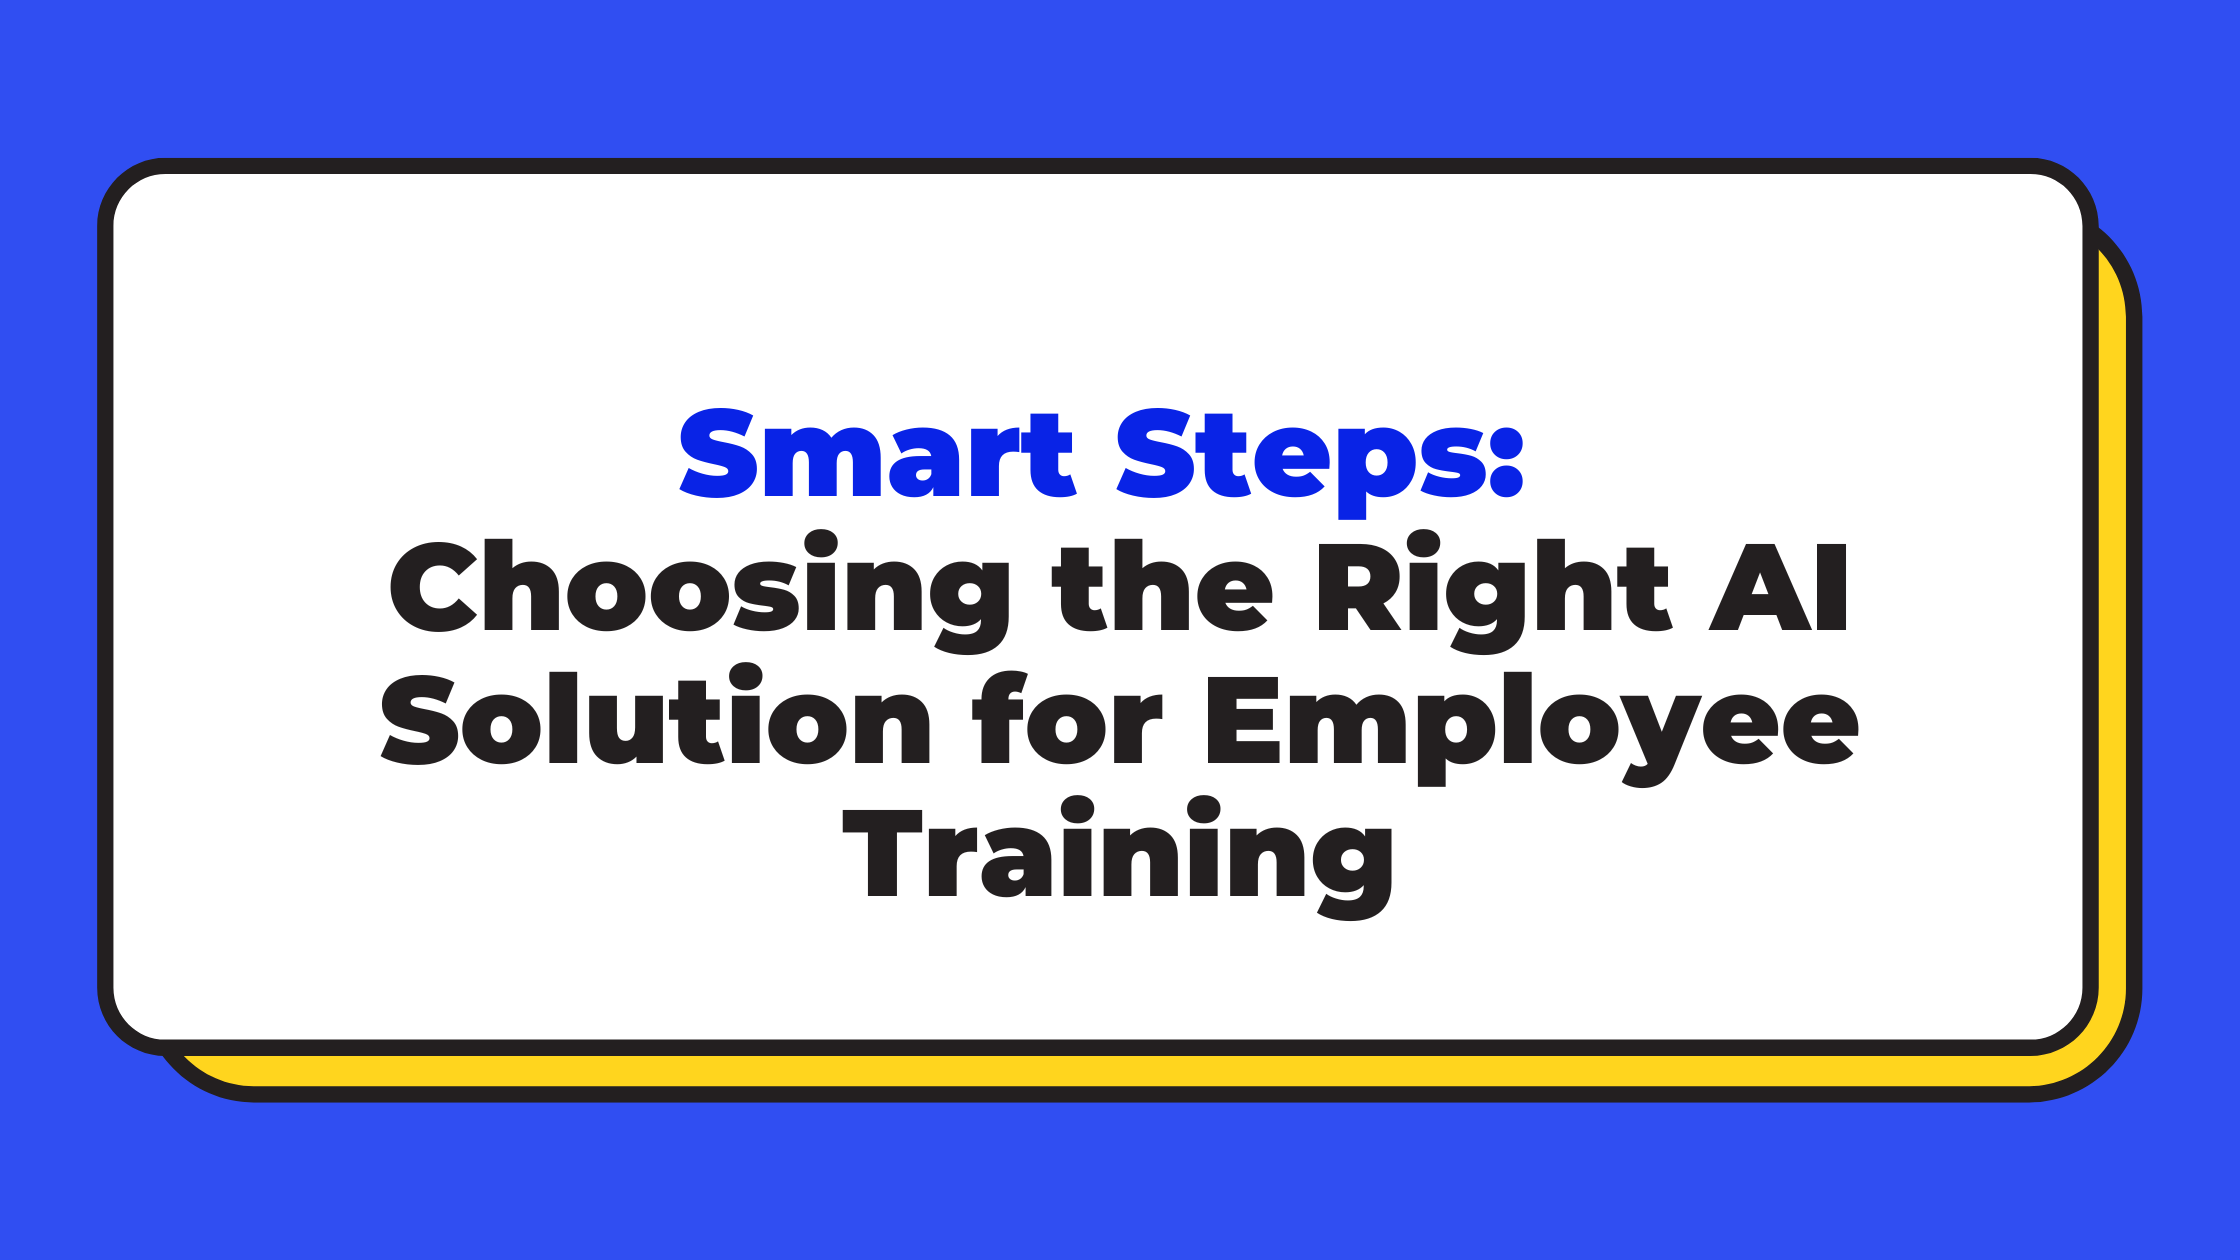 Smart Steps: Choosing the Right AI Solution for Employee Training